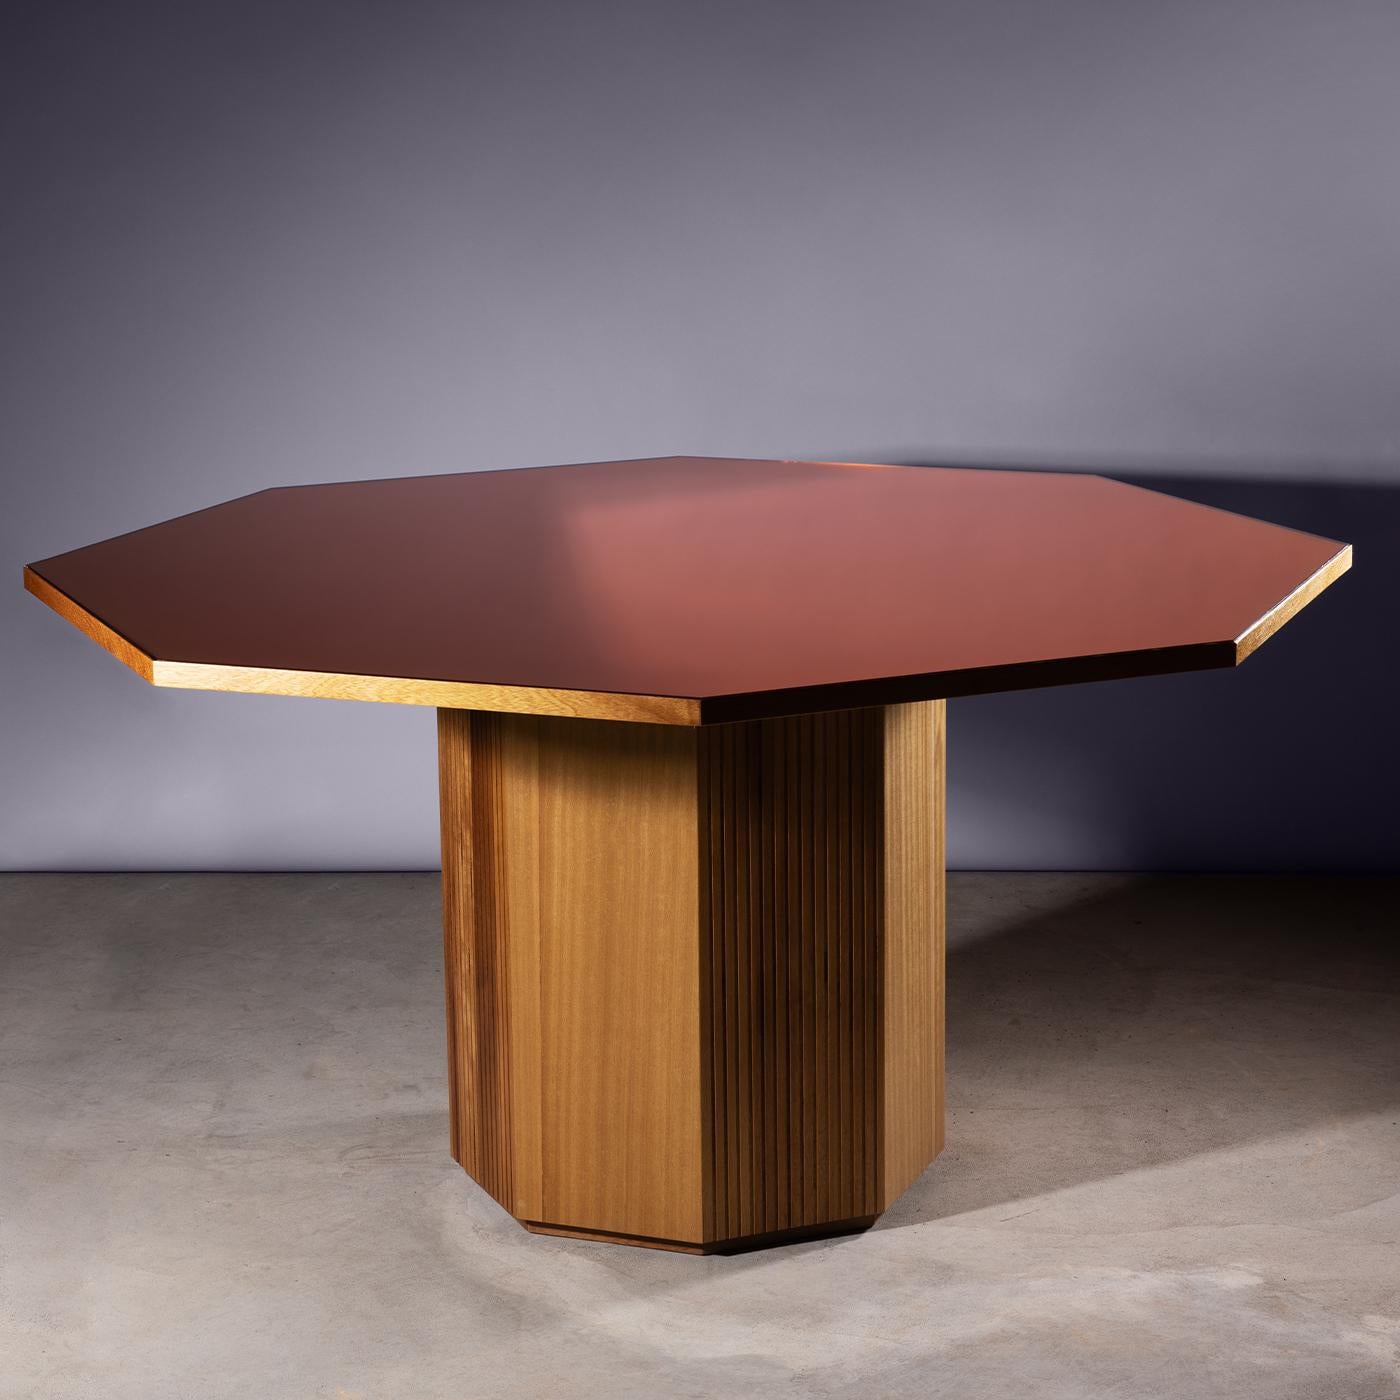 The elegant combination of singular materials and innovative design makes this an exceptional dining experience for a modern interior. Featuring a golden hue octagonal base crafted in alternate panels of smooth and slatted Iroko wood, and topped by